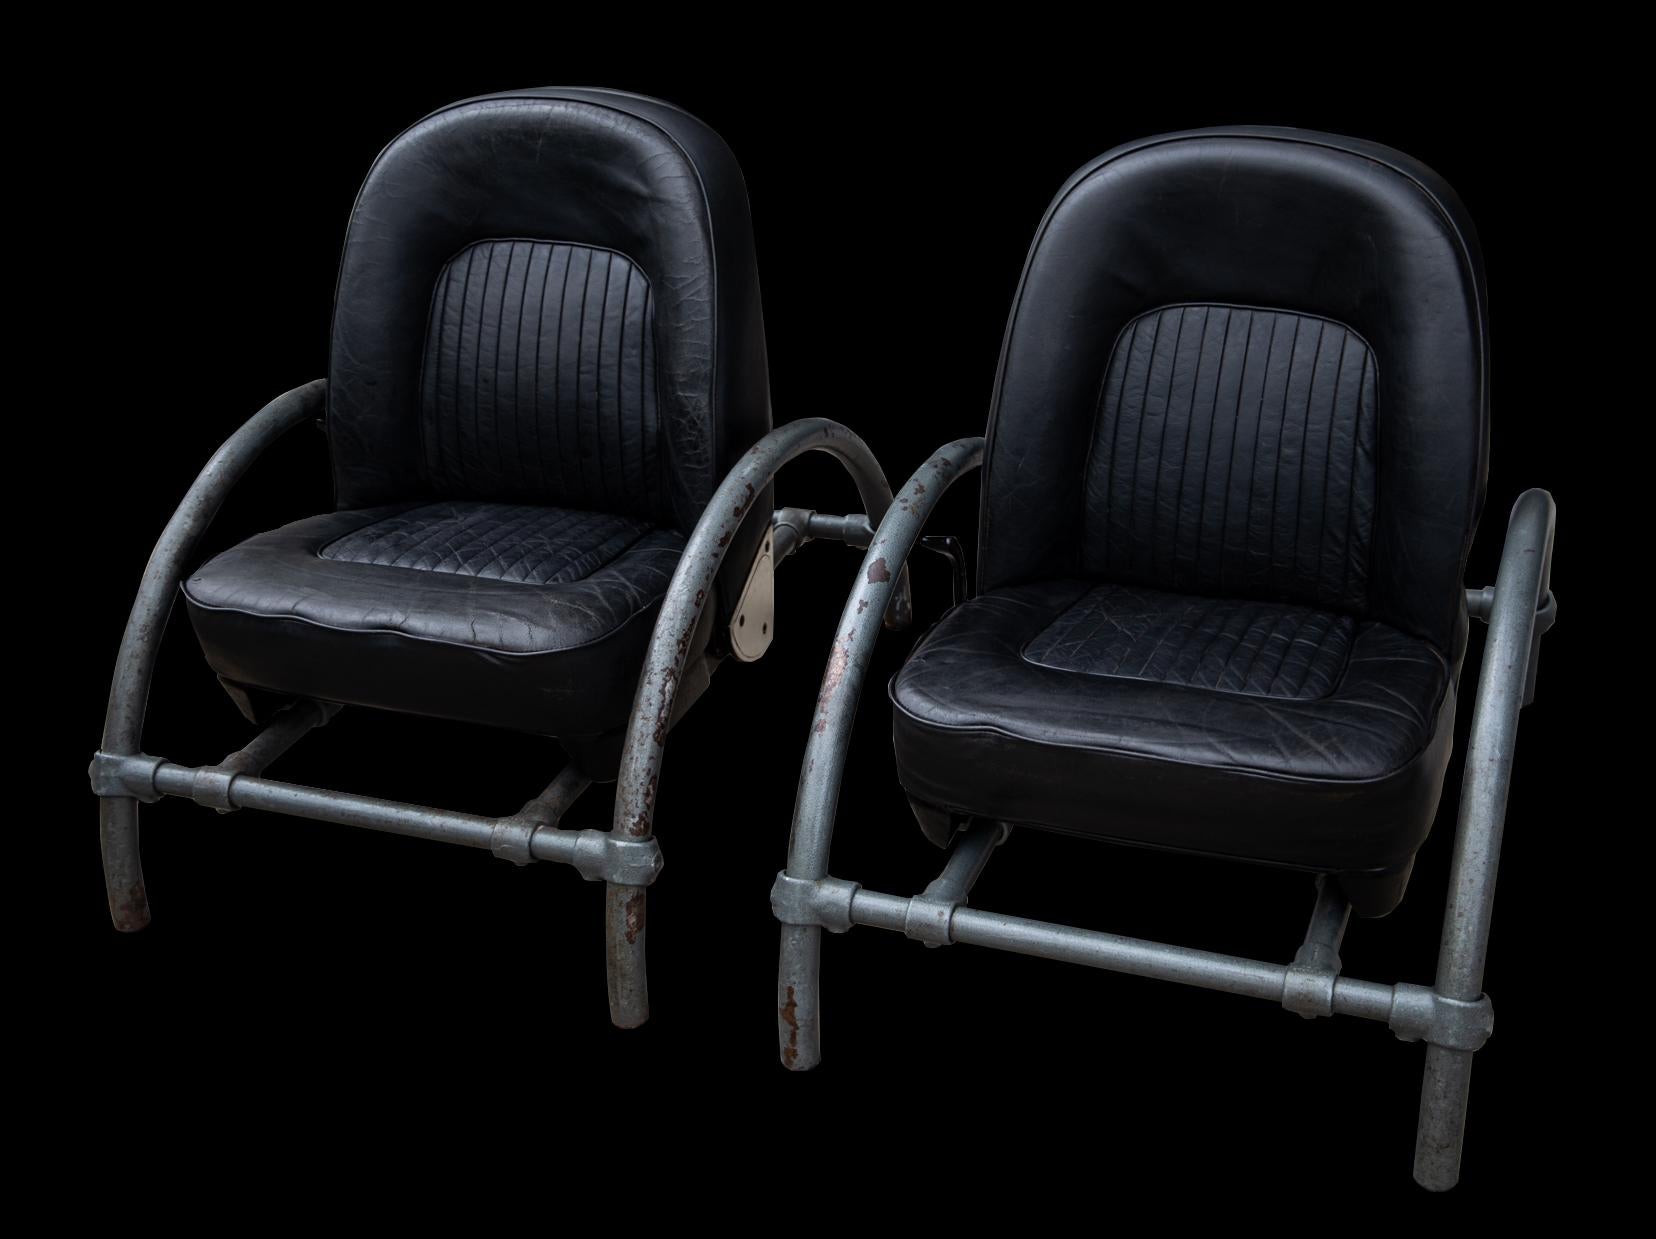 British Pair of Black Leather Ron Arad Rover Chairs by One Off Ltd, London, Early 80s